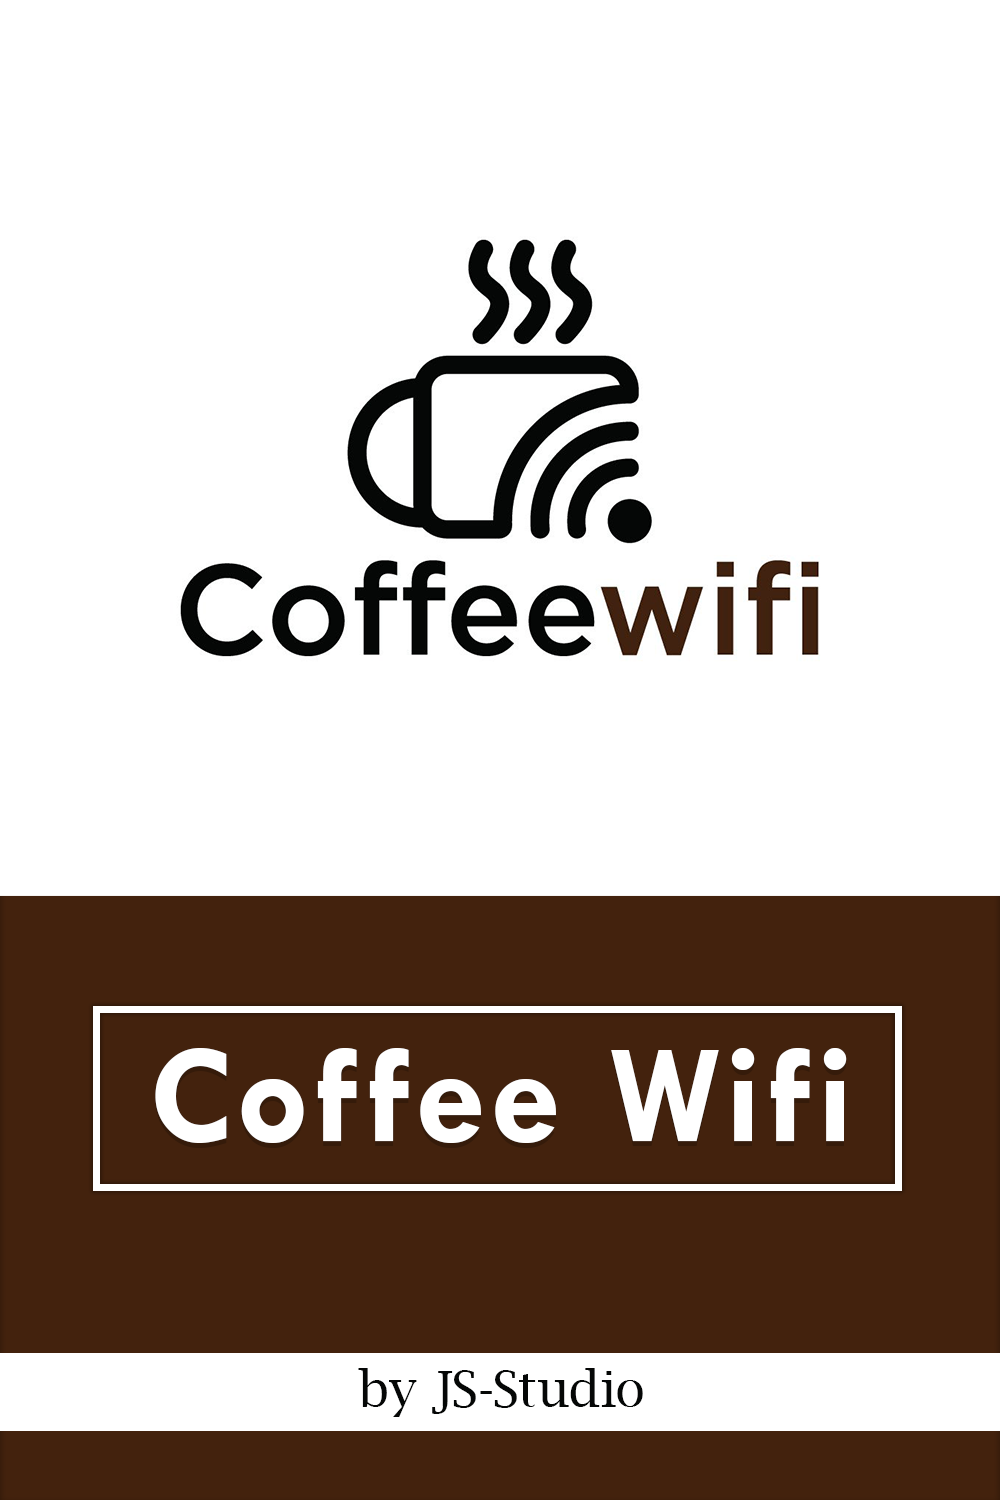 Cup with wifi element for logo.